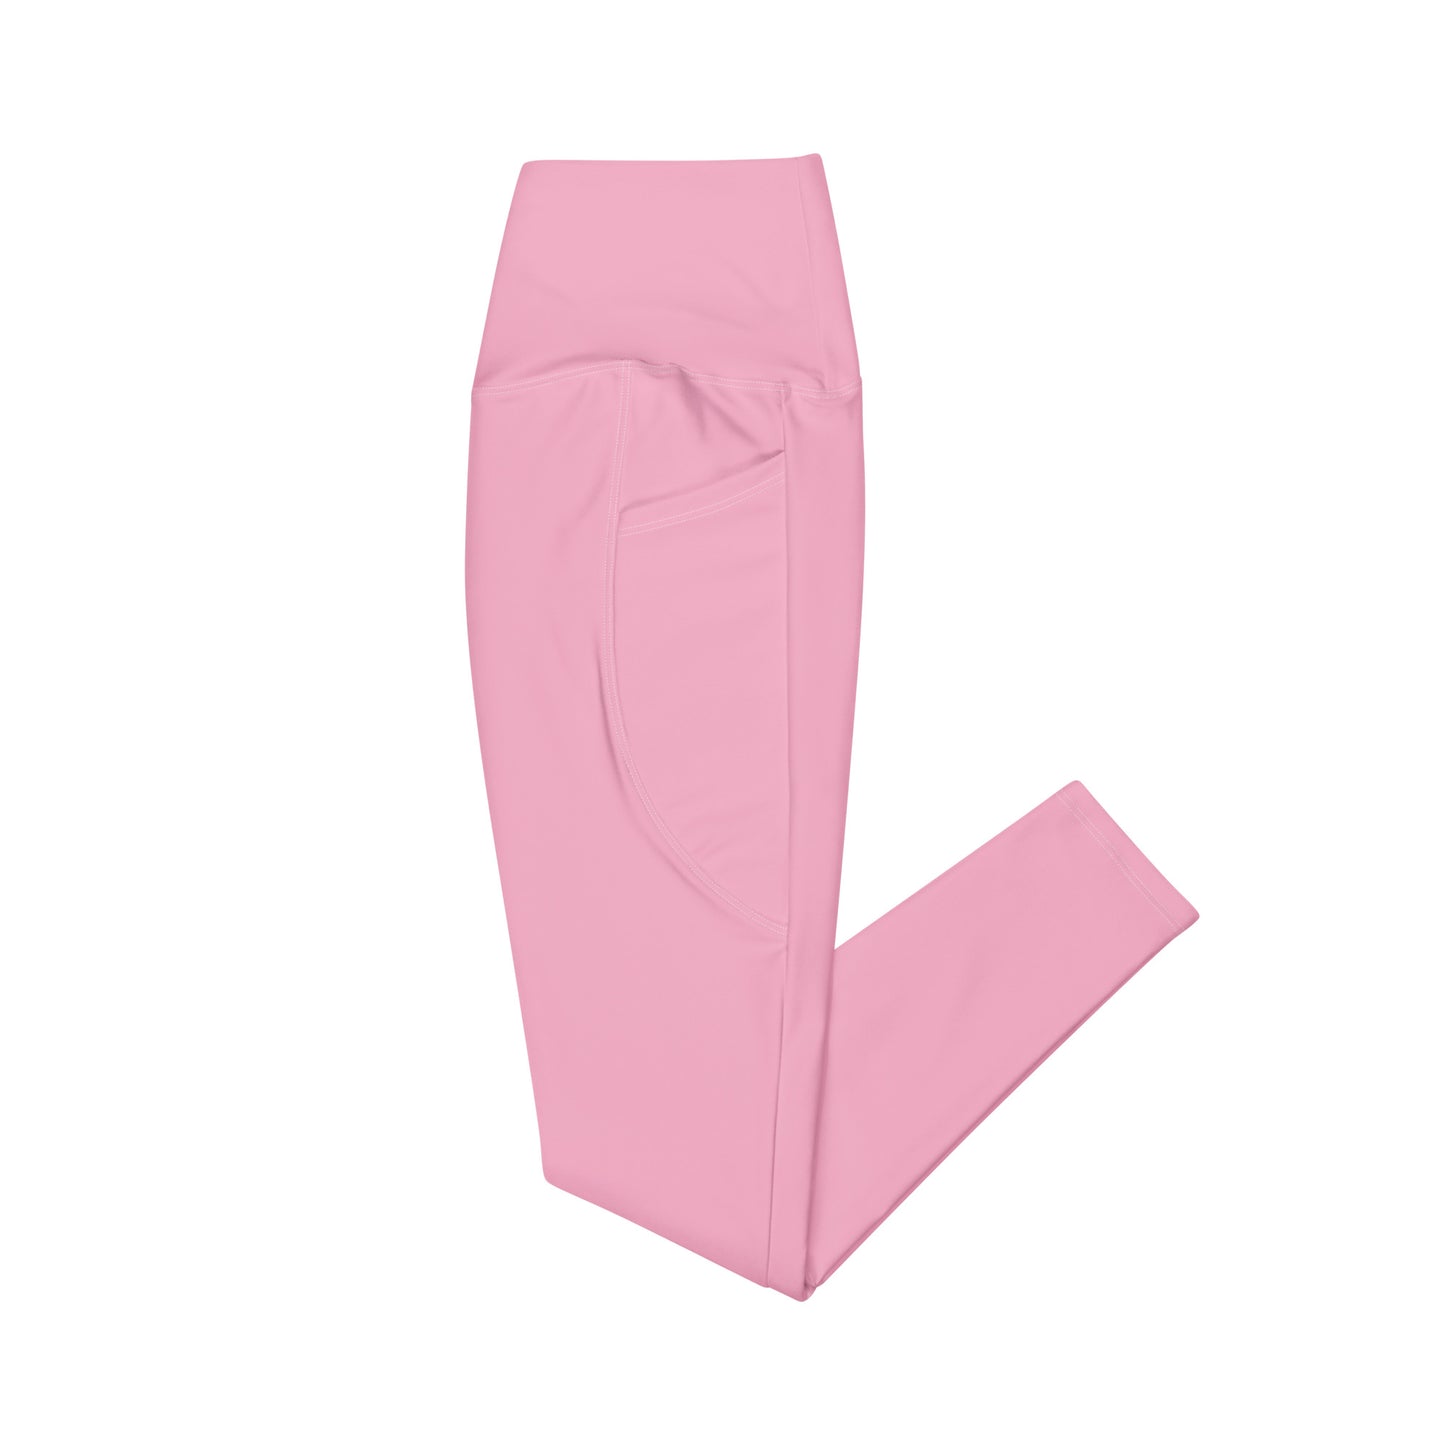 Garten Solid Pink Crossover Waist 7/8 Recycled Yoga Leggings / Yoga Pants with Pockets